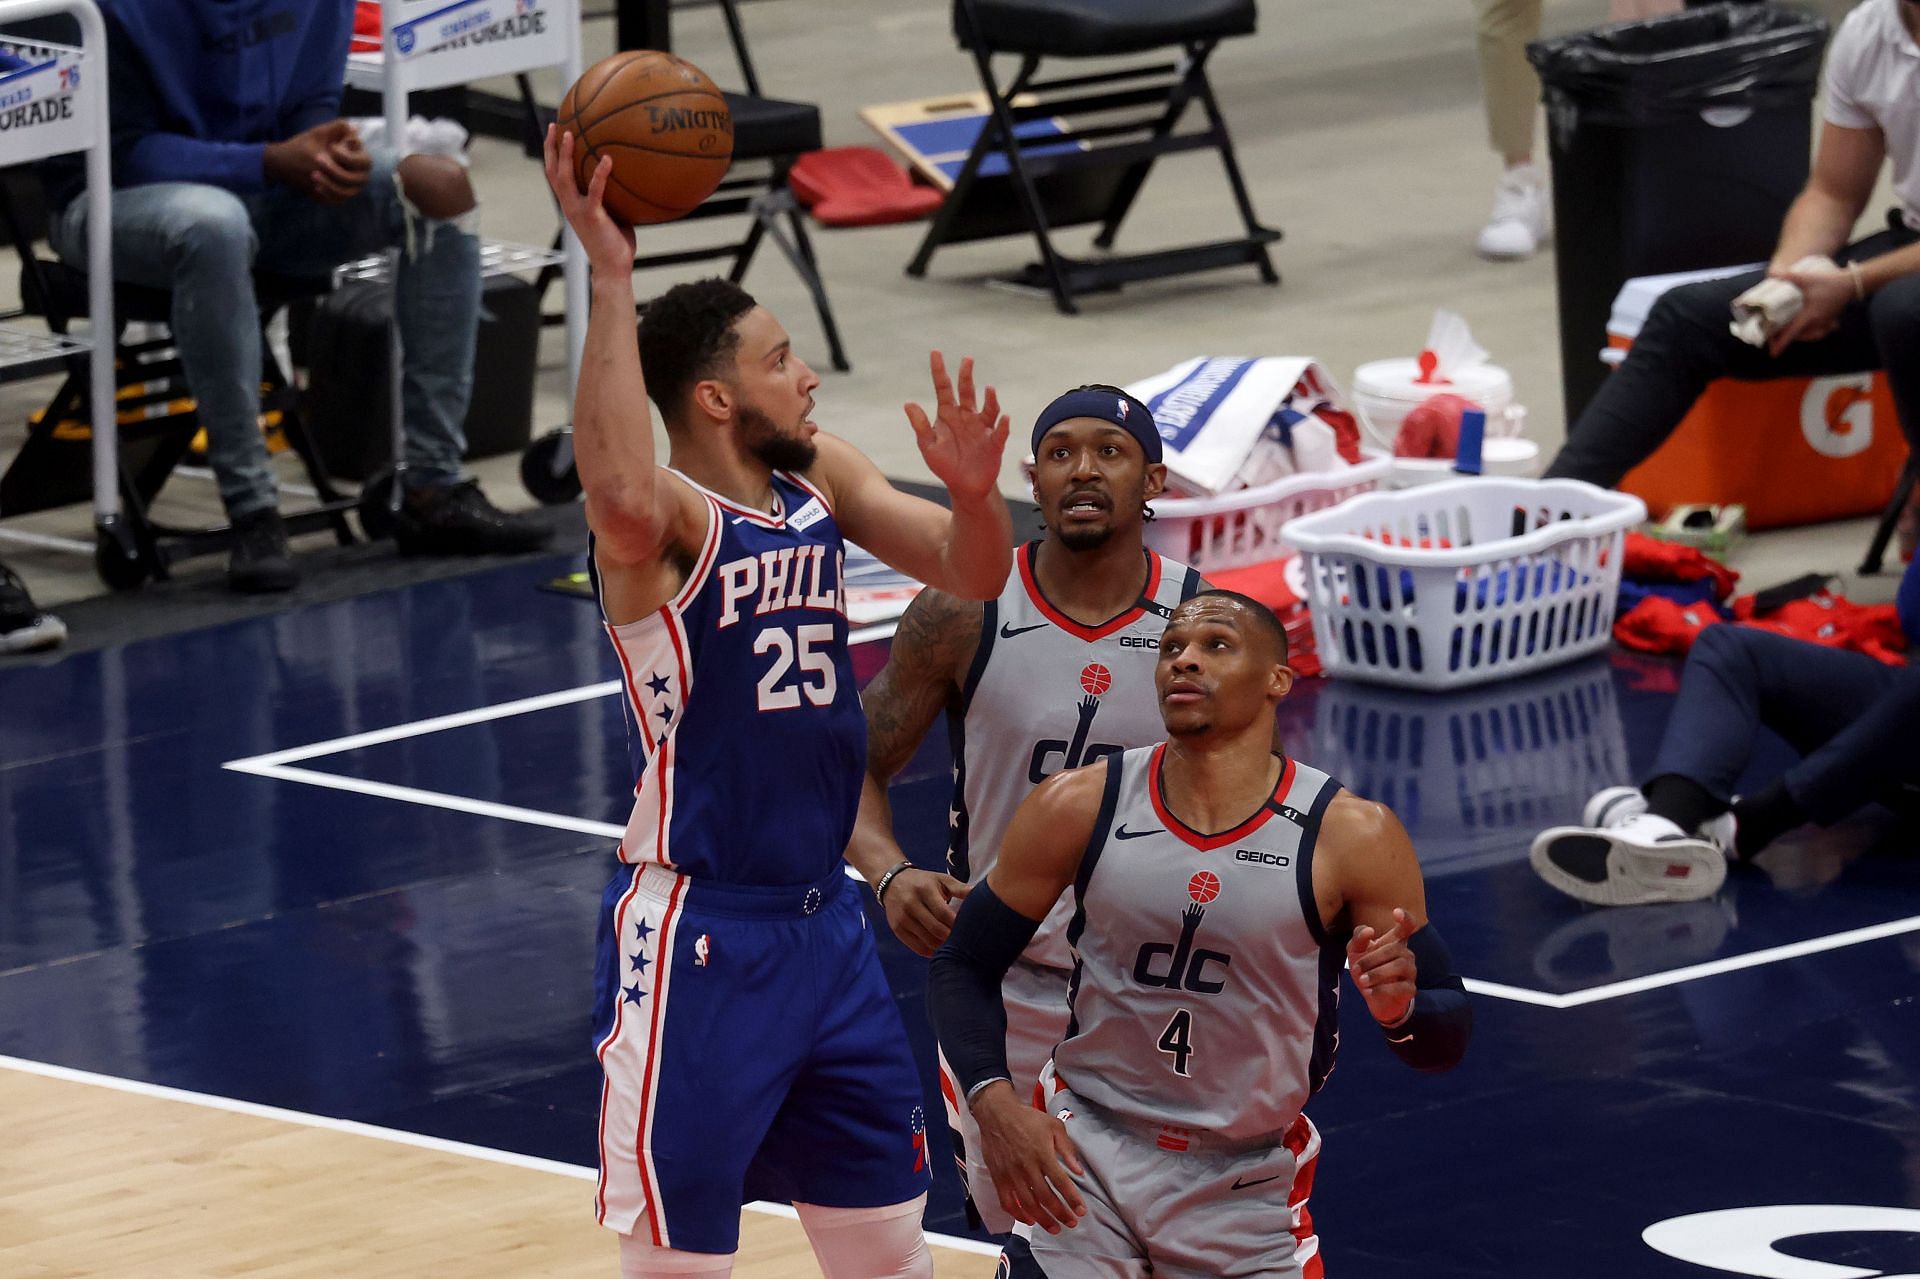 Simmons against the Washington Wizards